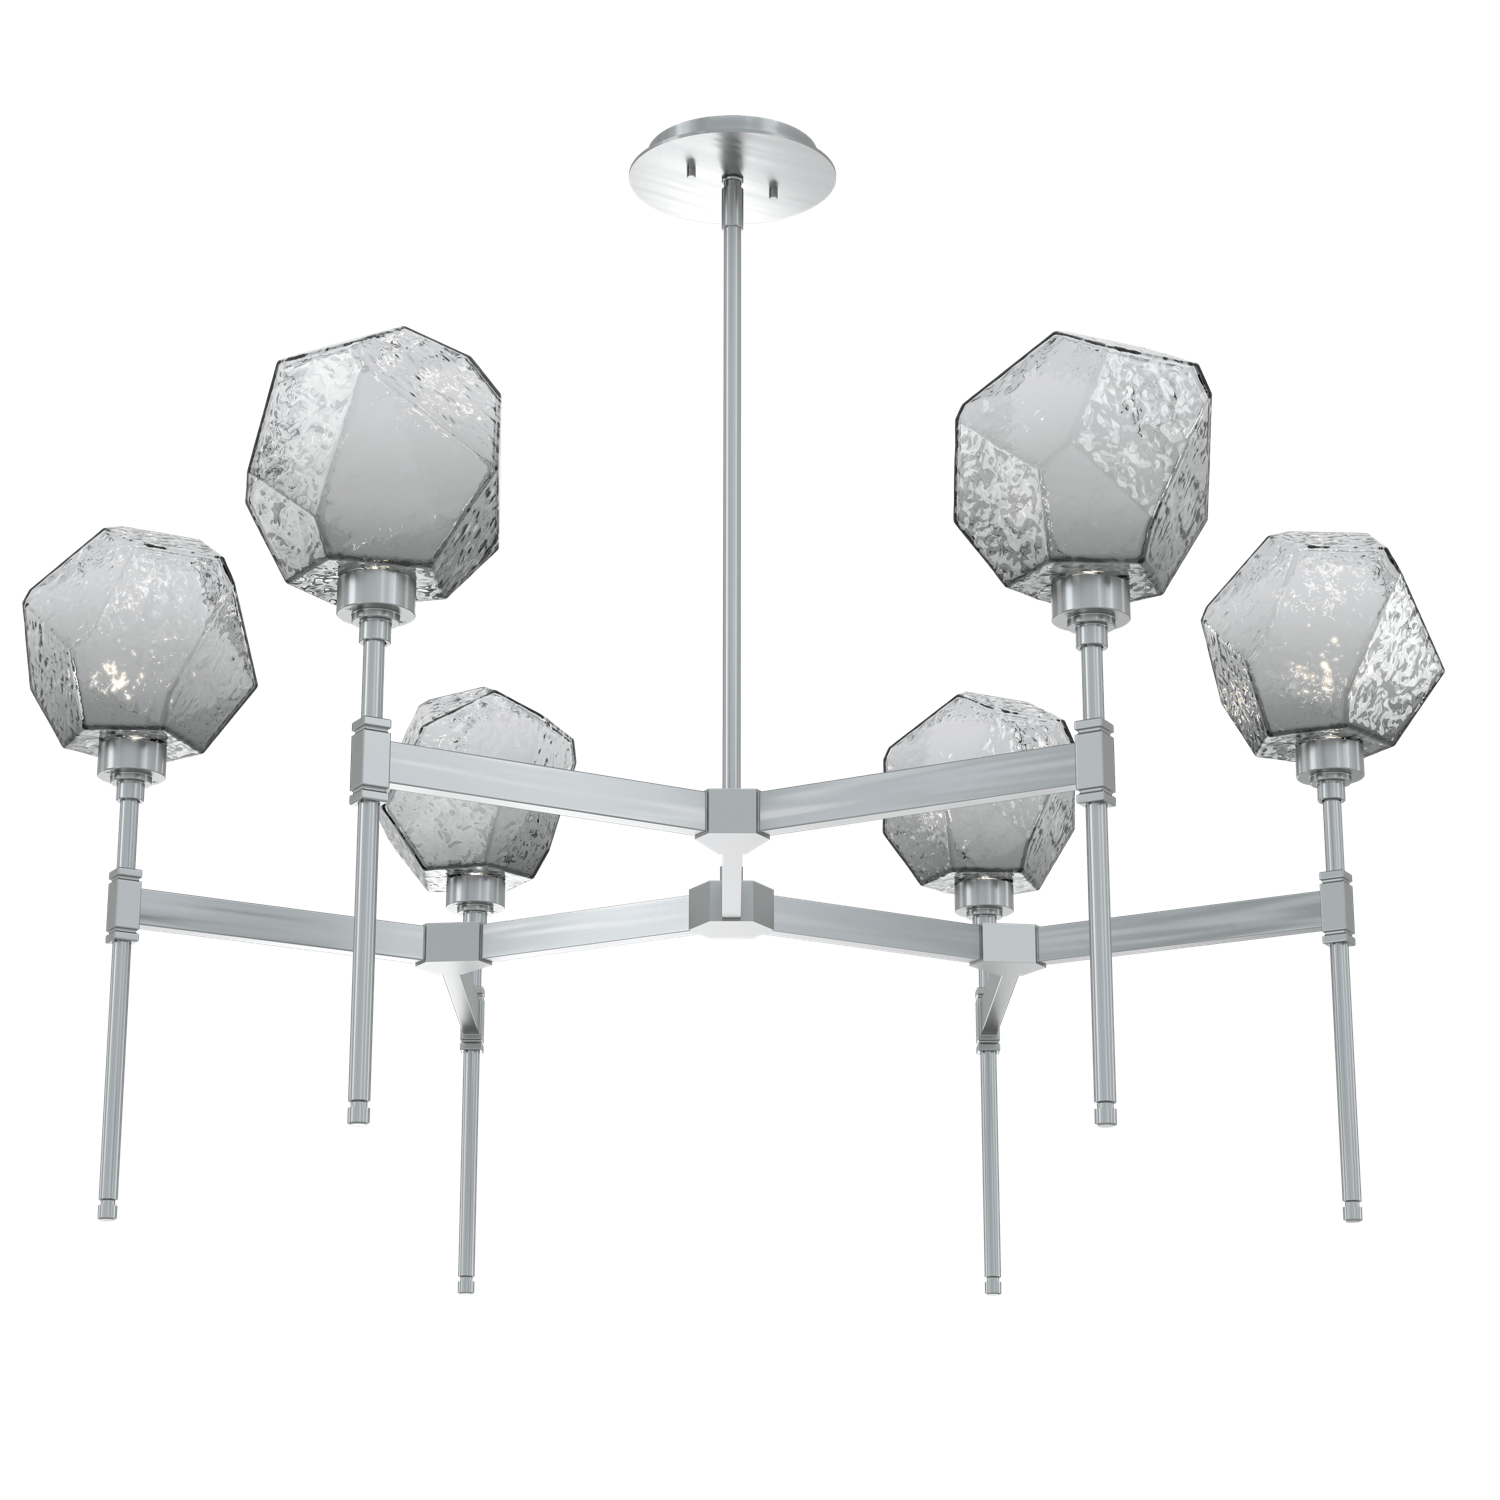 CHB0039-39-SN-S-Hammerton-Studio-Gem-round-belvedere-chandelier-with-satin-nickel-finish-and-smoke-blown-glass-shades-and-LED-lamping